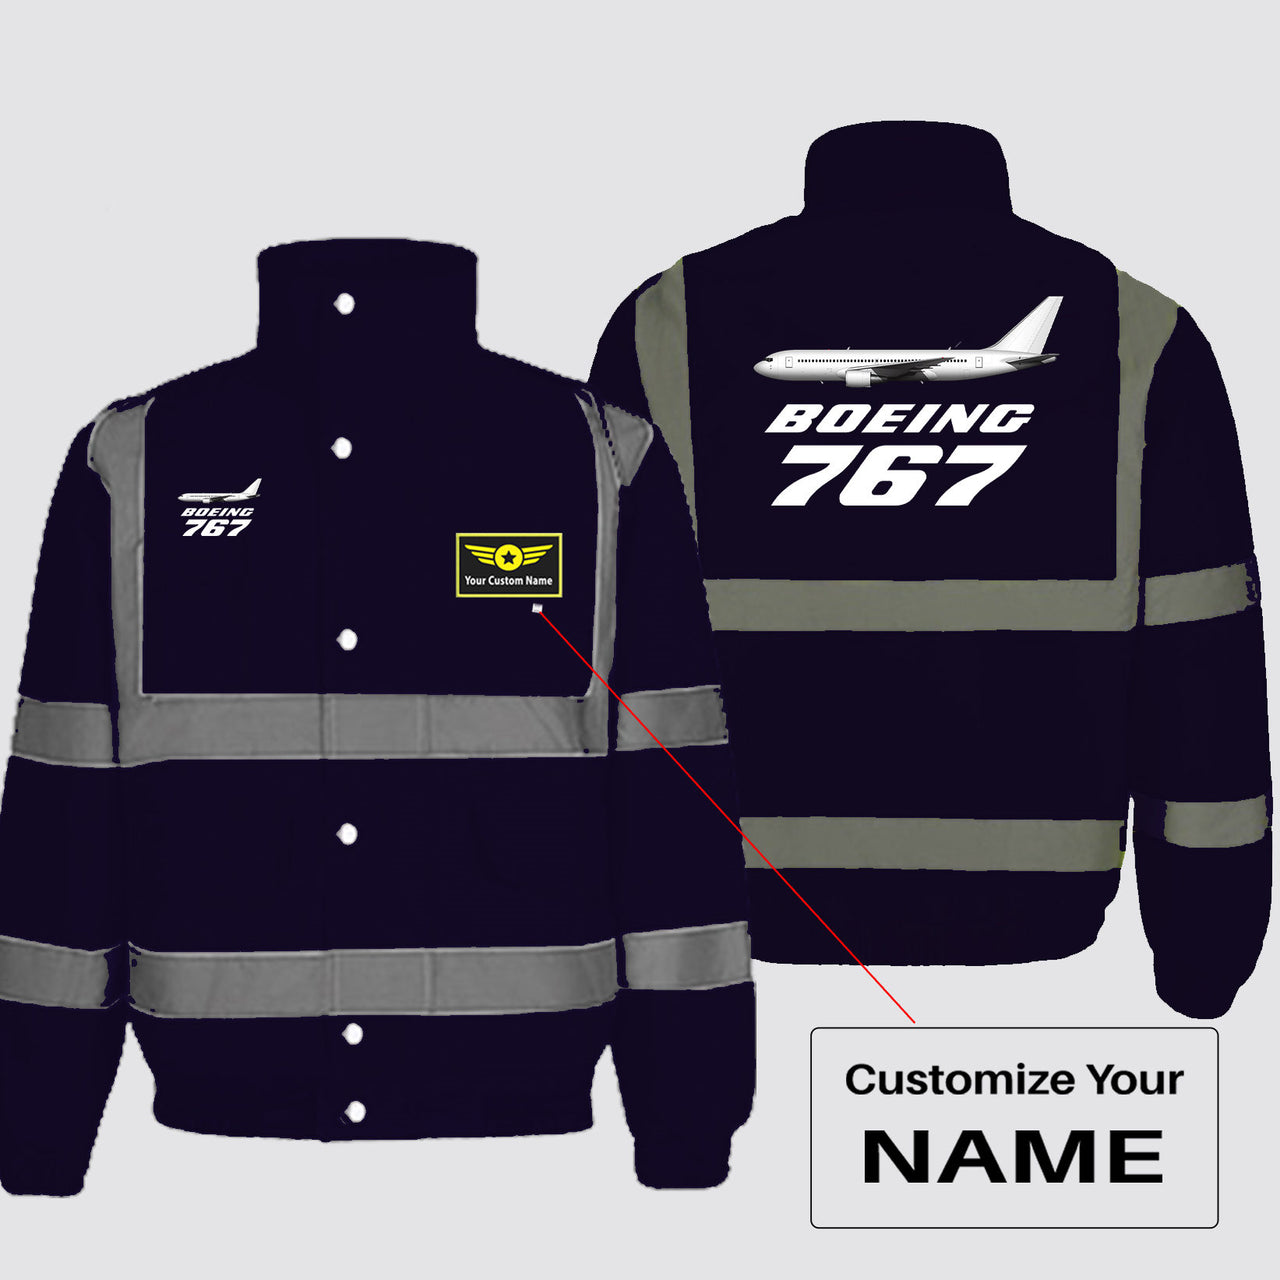 The Boeing 767 Designed Reflective Winter Jackets